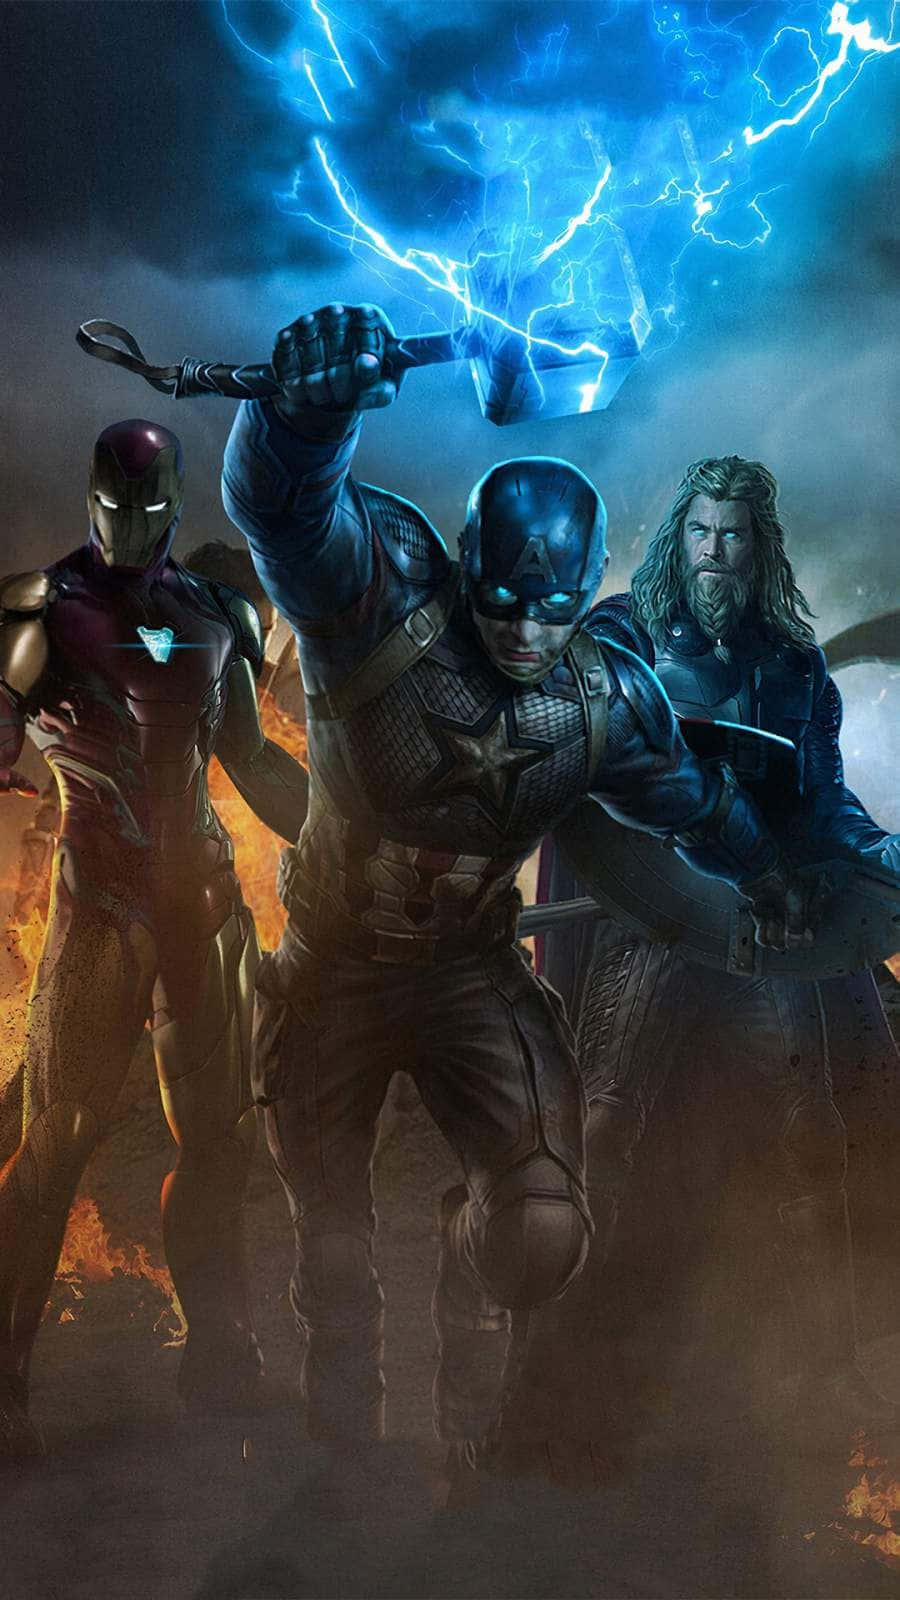 Unleash the Modern Avengers with the all-new Iphone Wallpaper